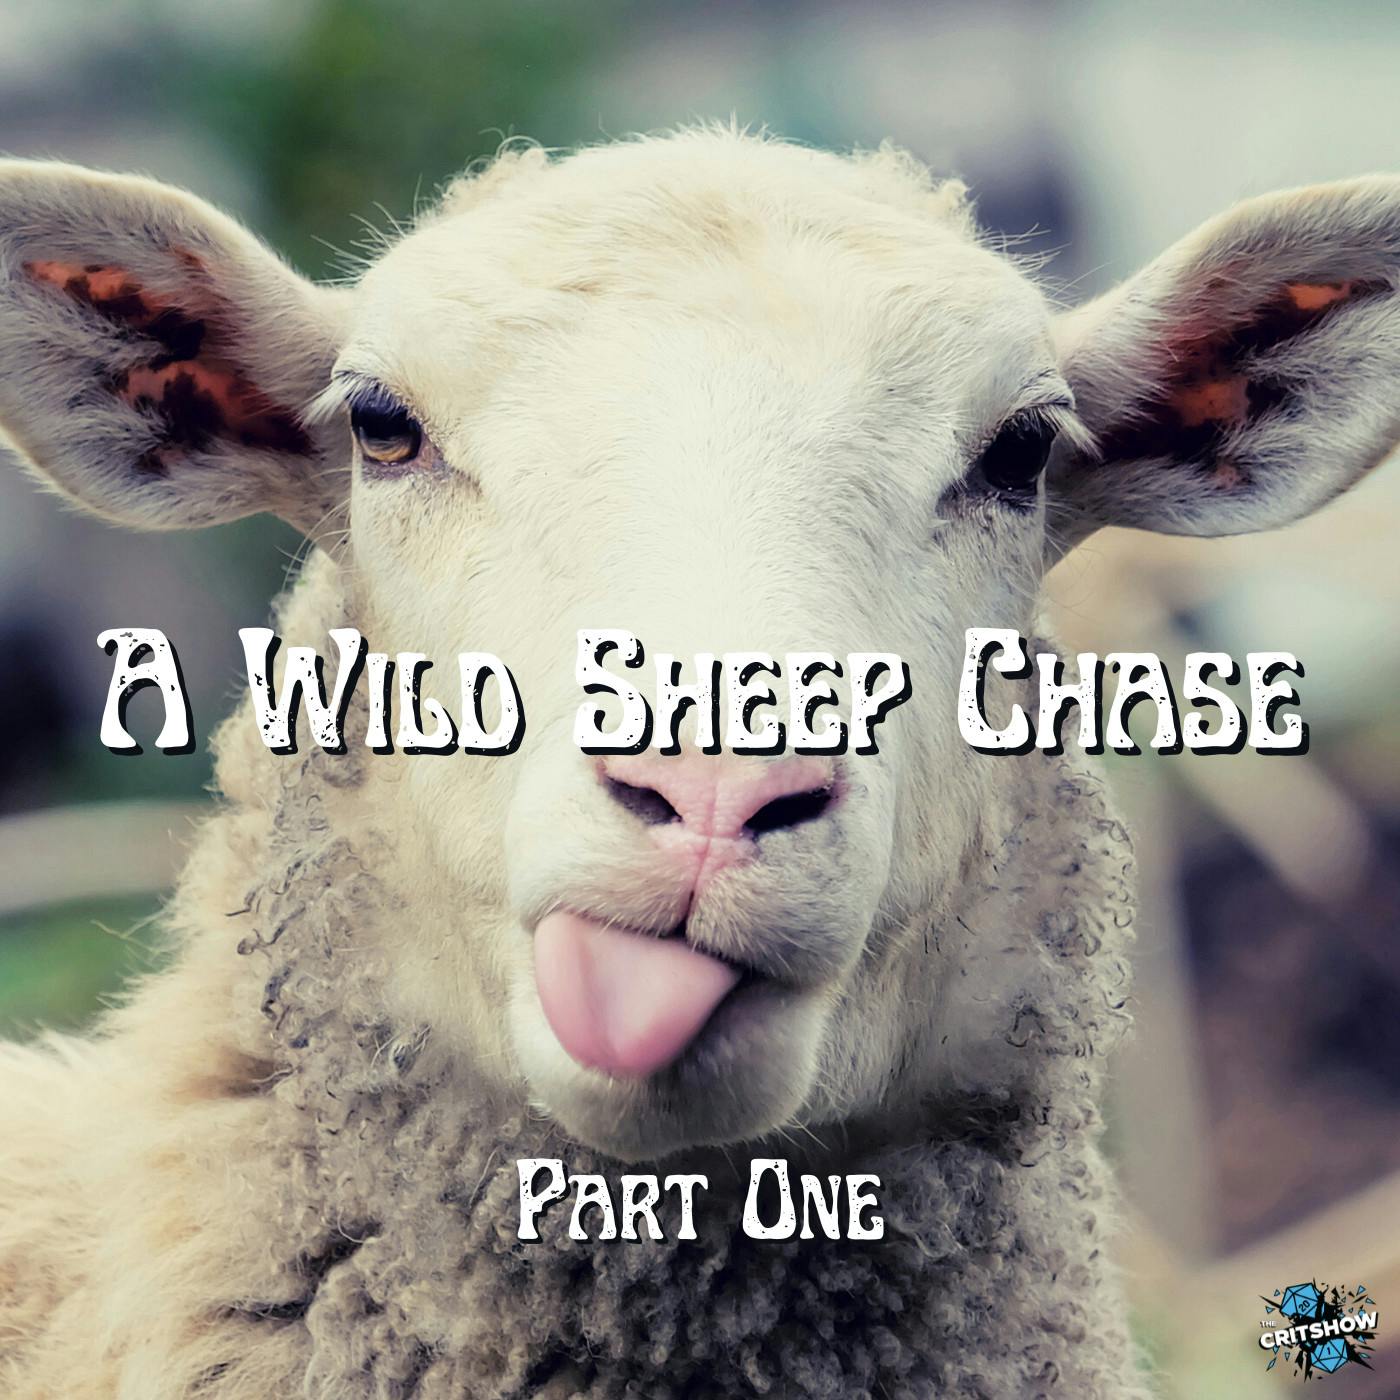 The Critshow: A Wild Sheep Chase (Part 1)